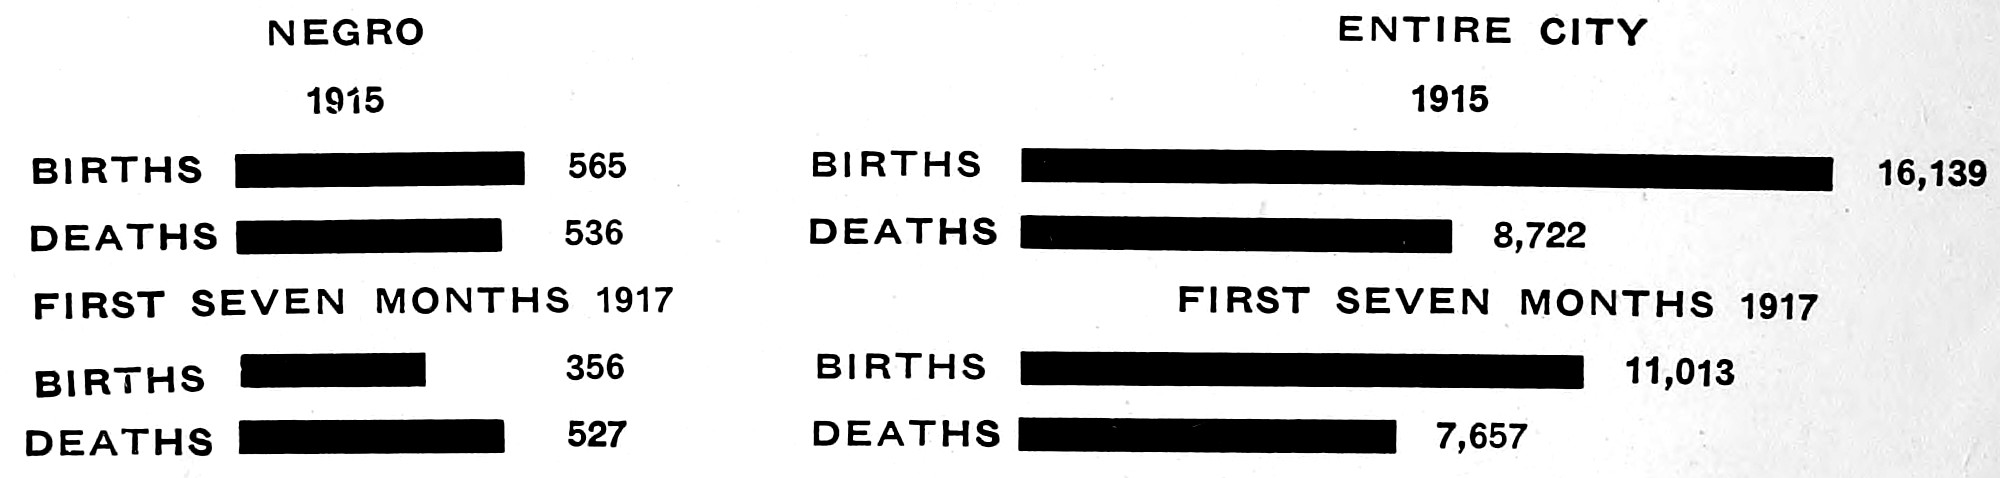 Table displaying the number of births and deaths for negroes versus the overall population